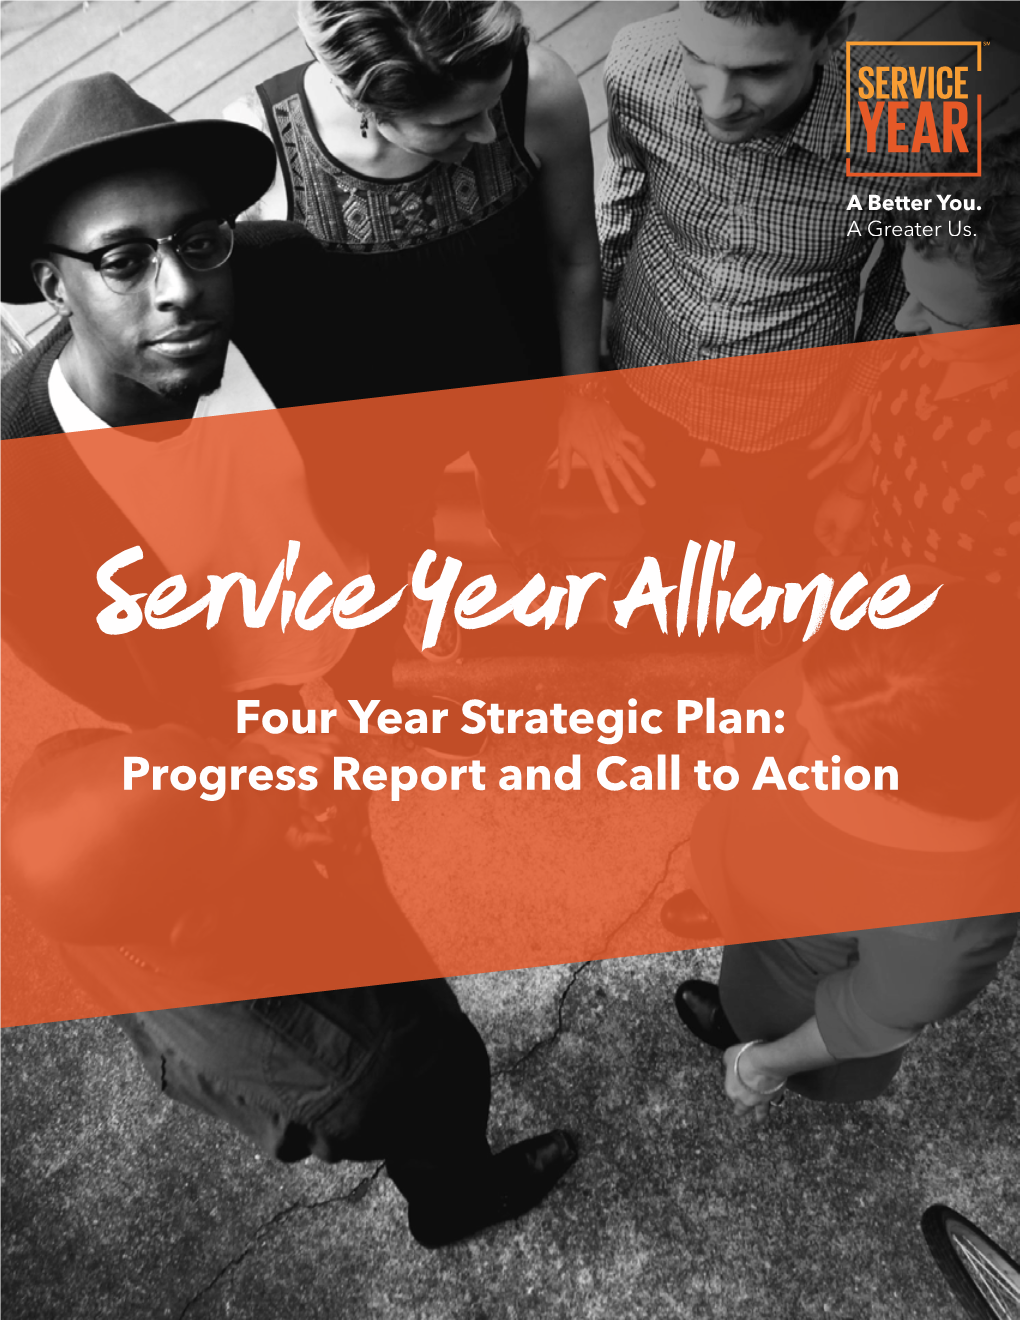 Service Year Alliance Four Year Strategic Plan: Progress Report and Call to Action